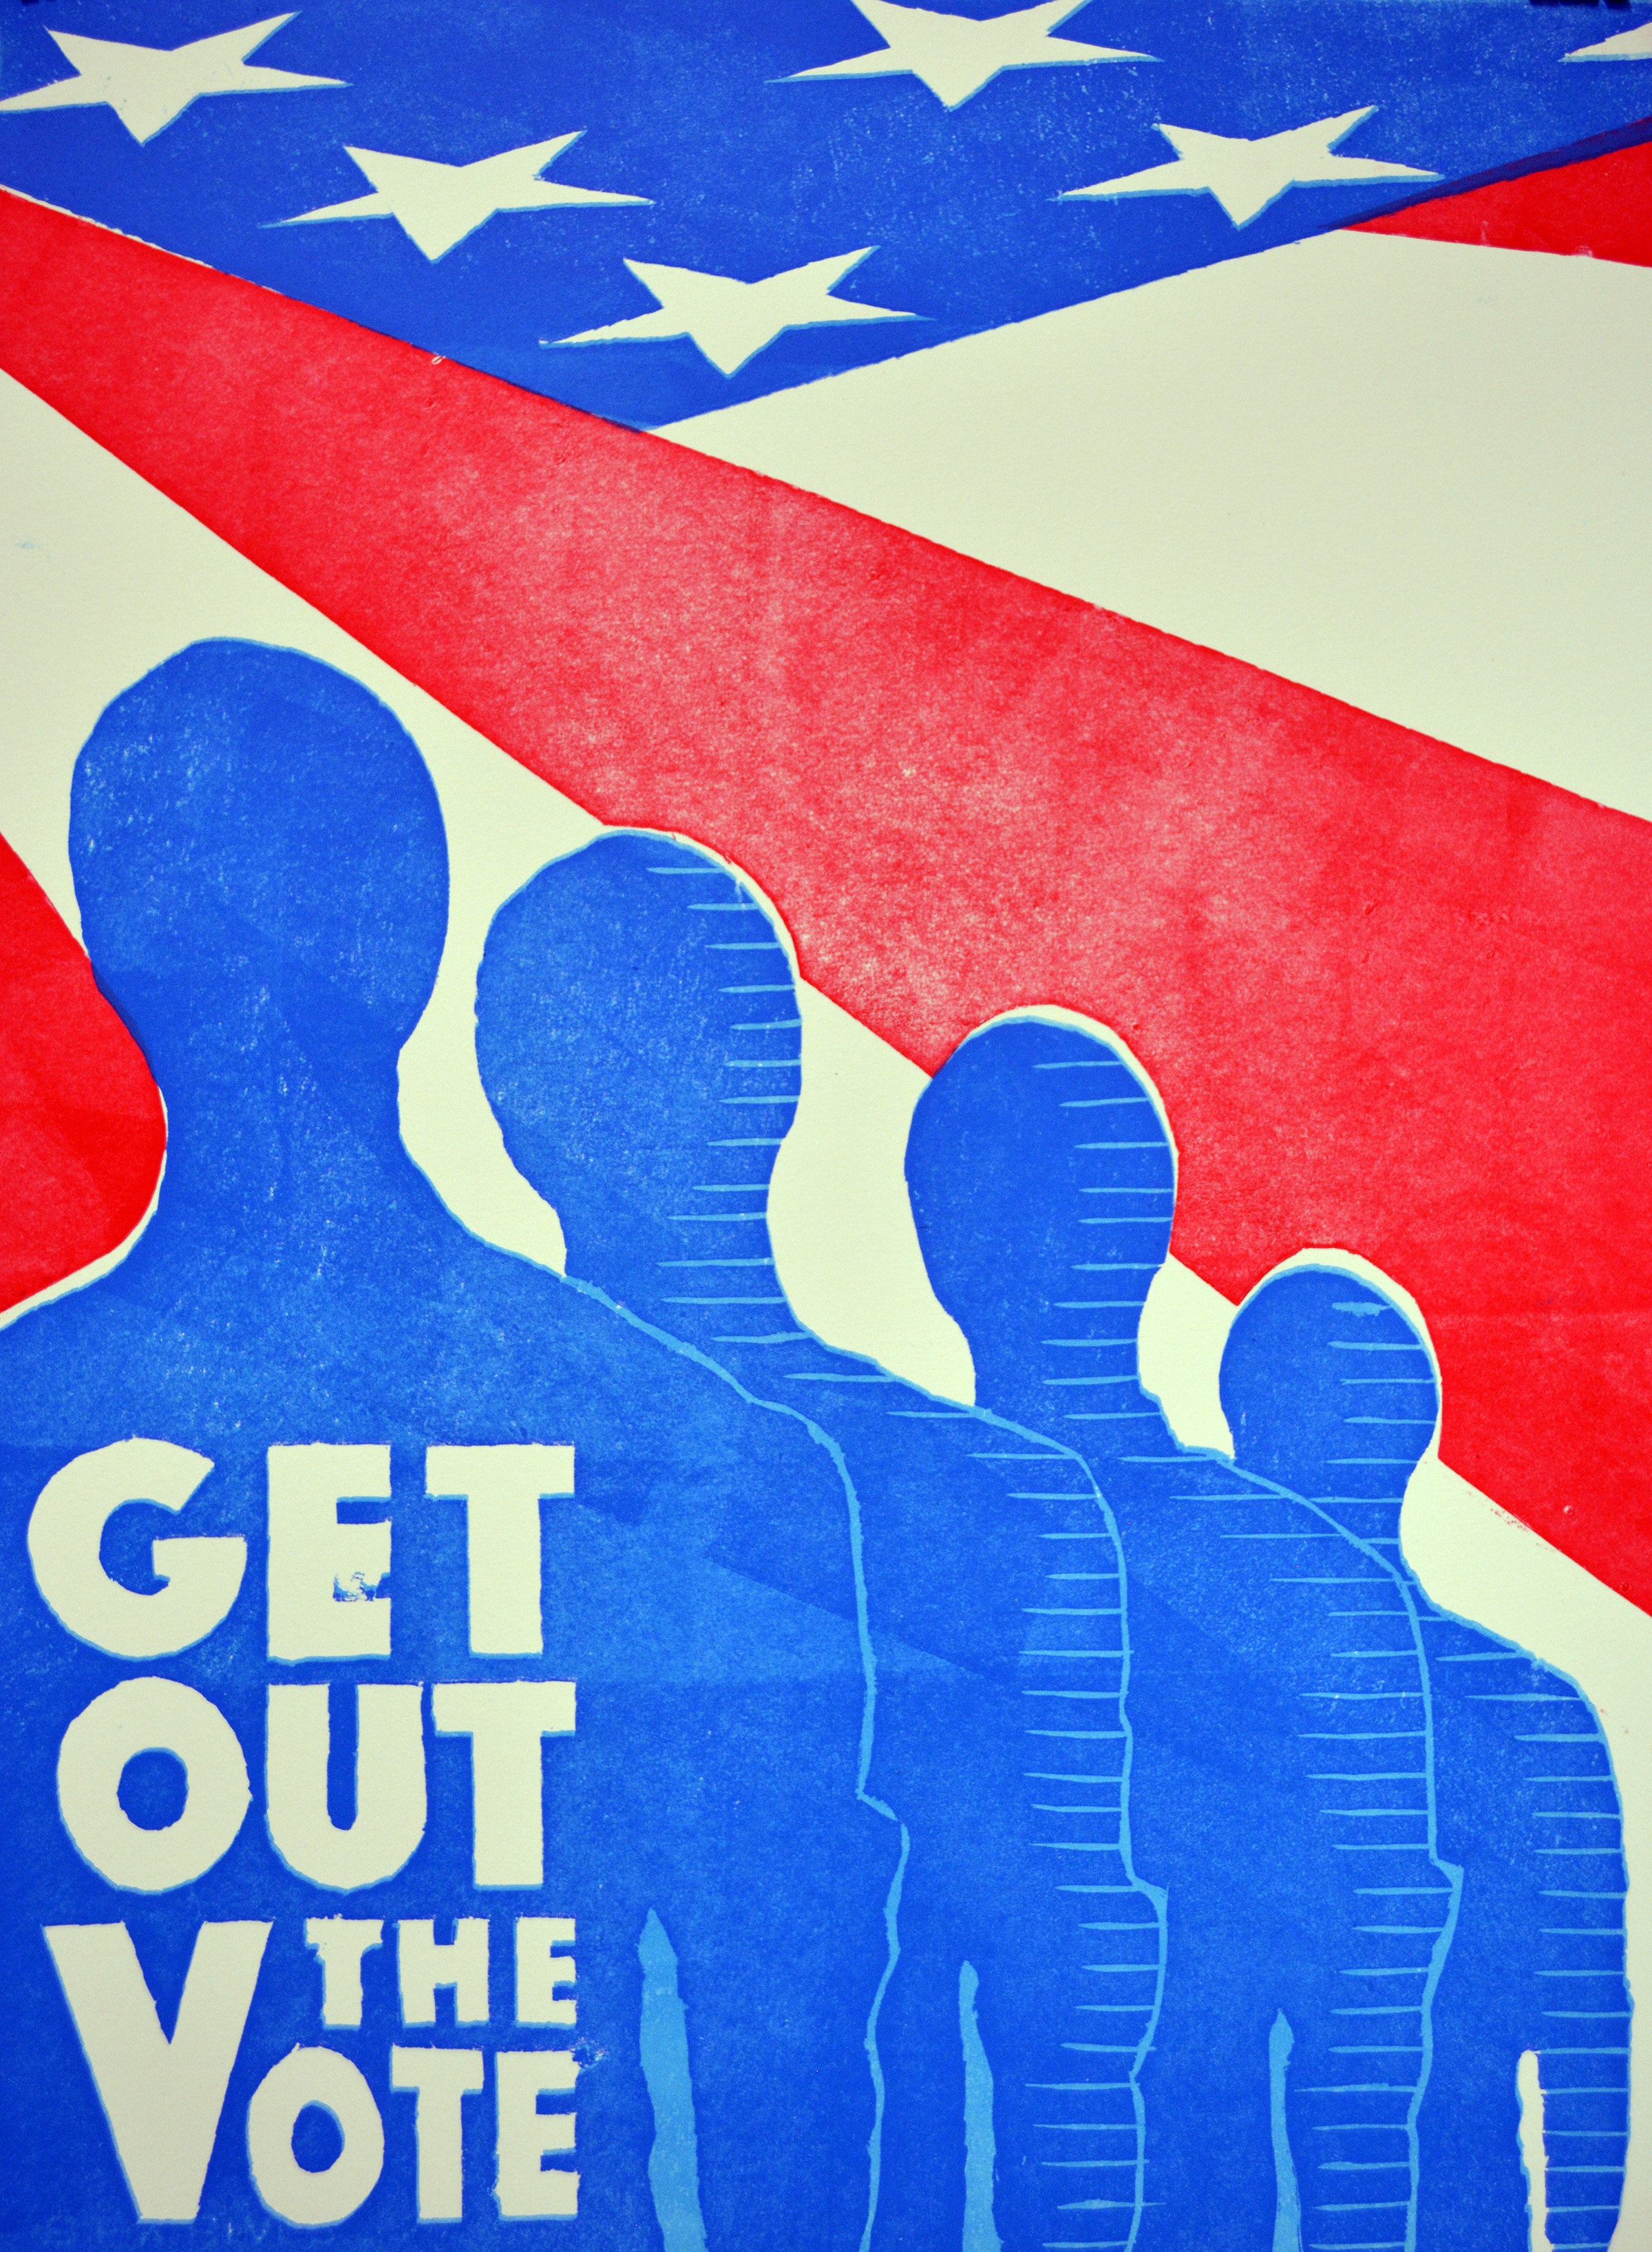 Get out and vote poster